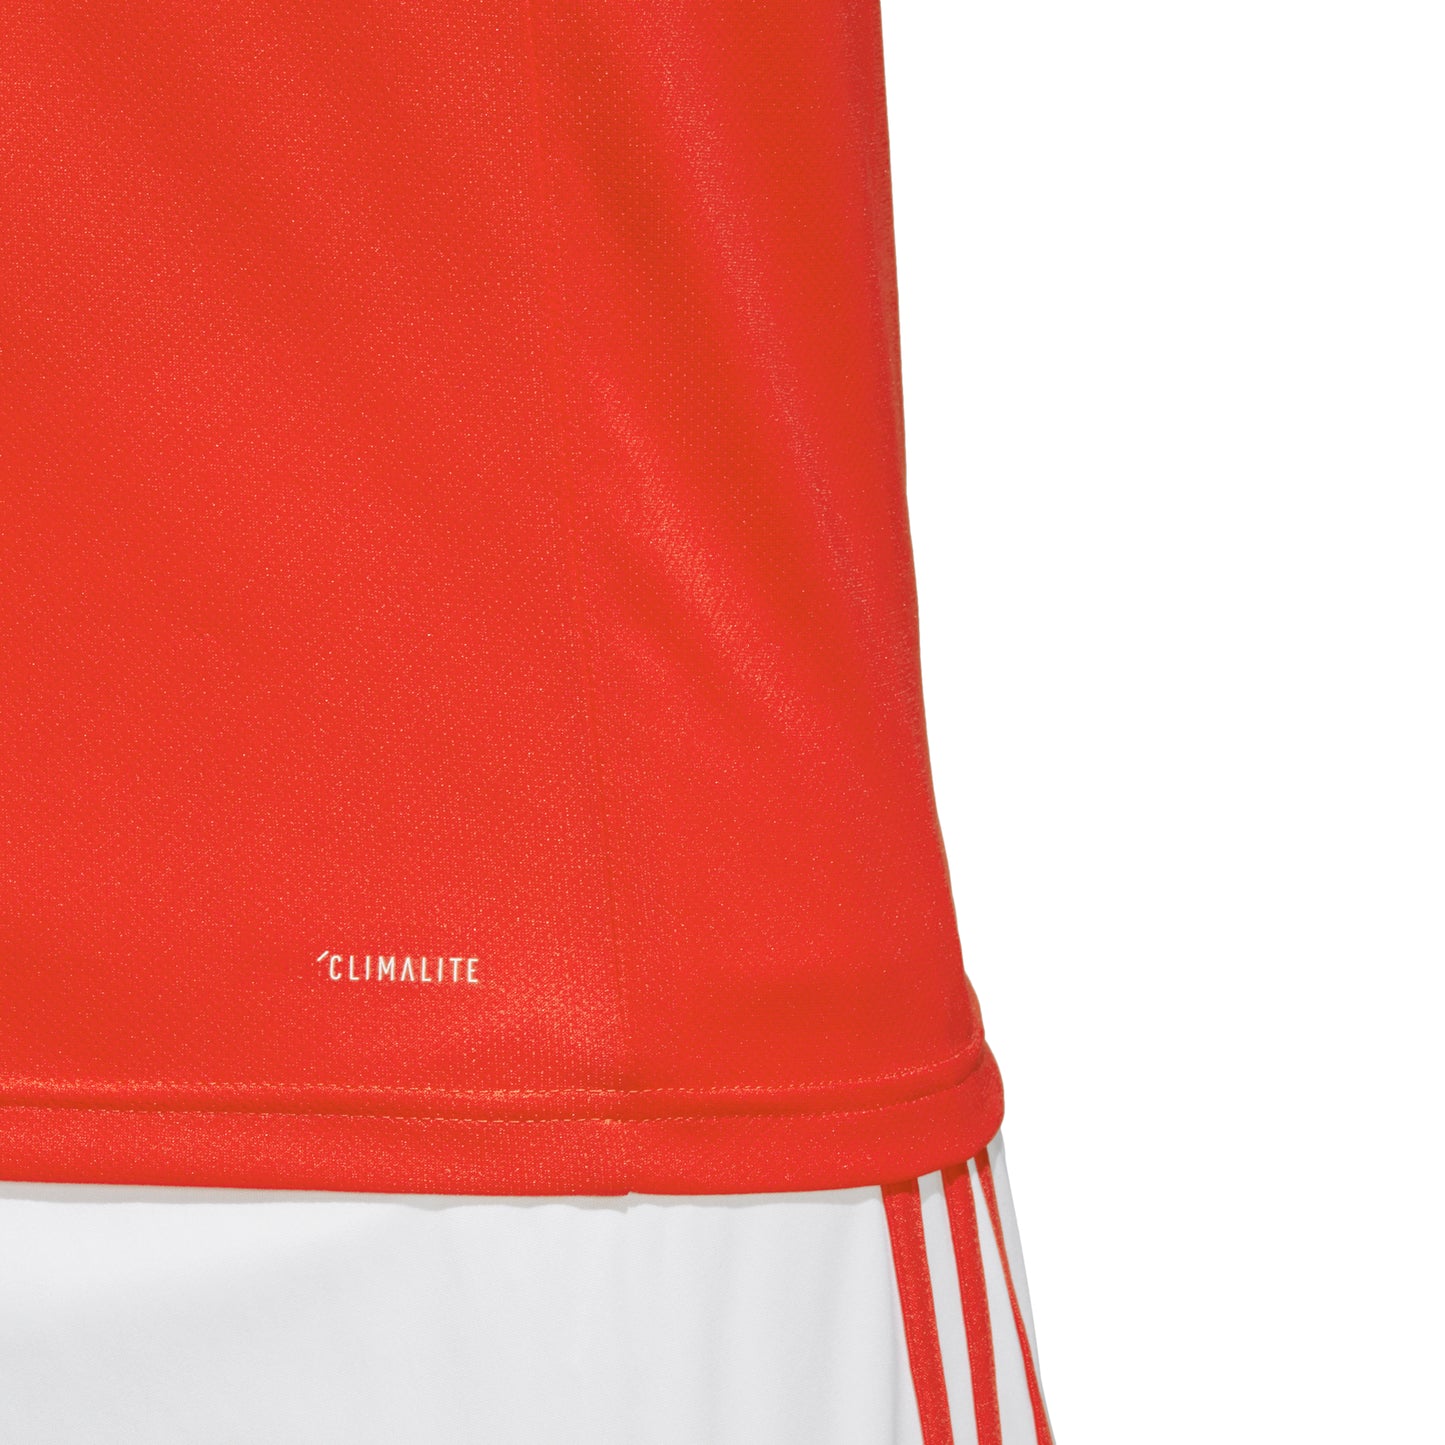 Adidas Russia Home Jersey